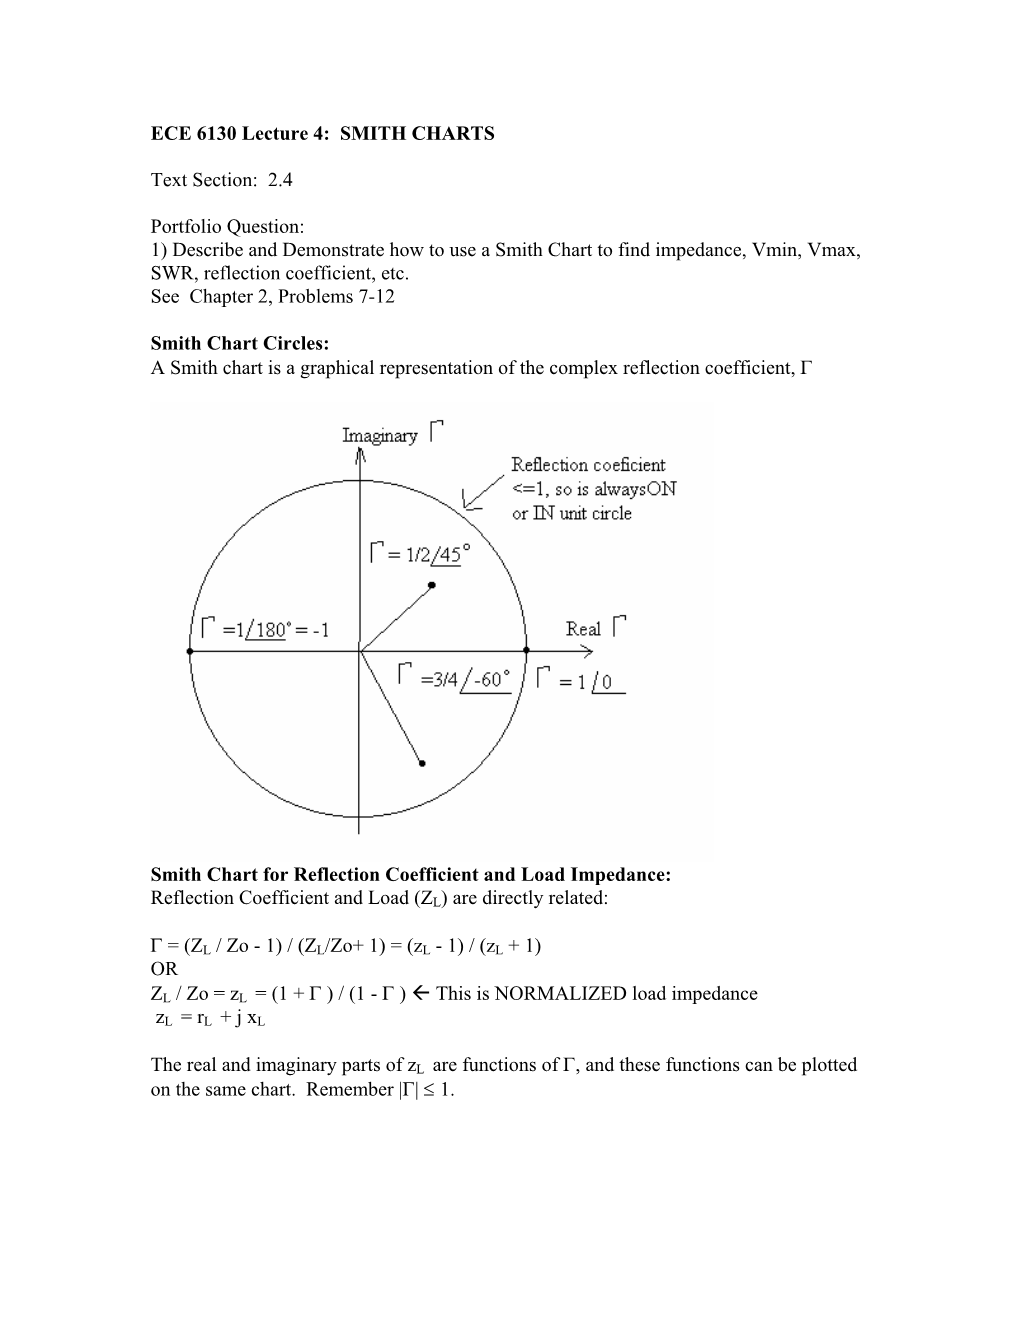 1) Describe and Demonstrate How to Use a Smith Chart to Find Impedance, Vmin, Vmax, SWR, Reflection Coefficient, Etc